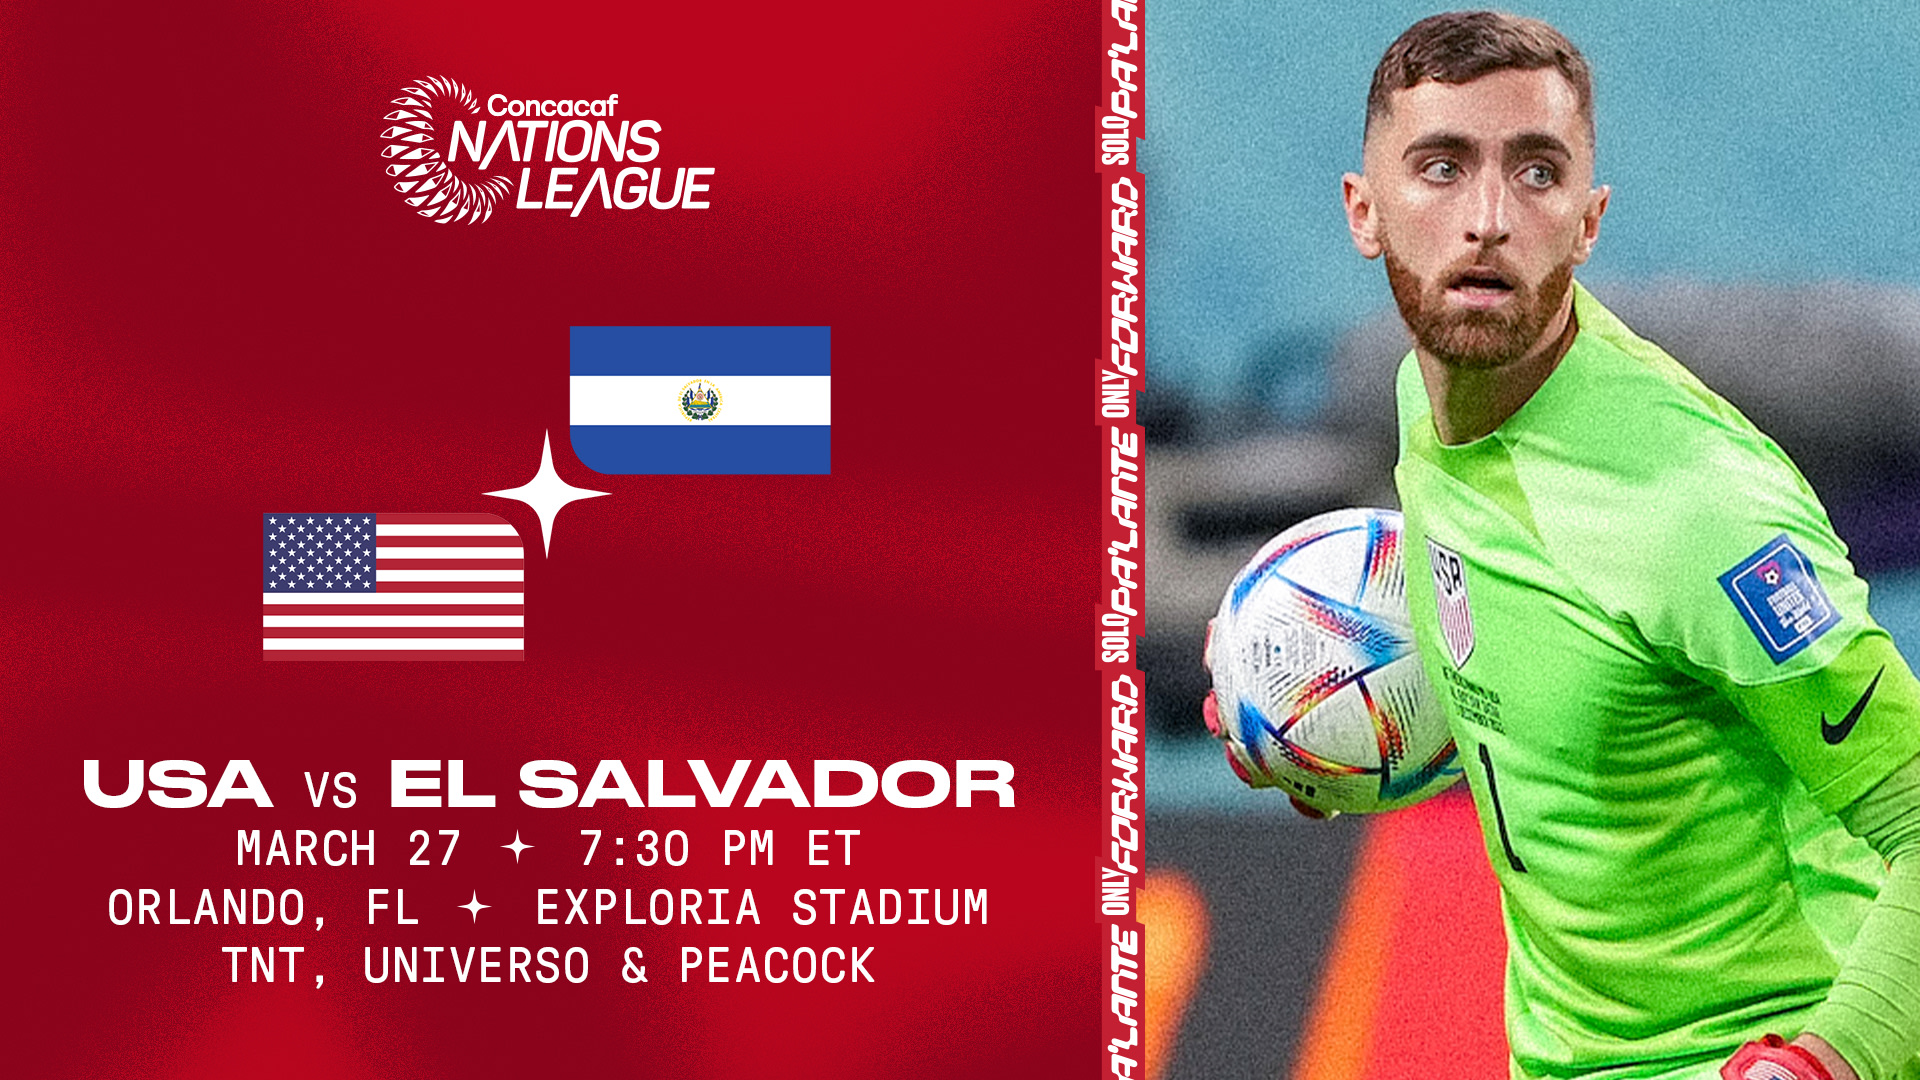 U.S. Soccer selects Orlando to host USA-El Salvador for Concacaf Nations League Group D Finale